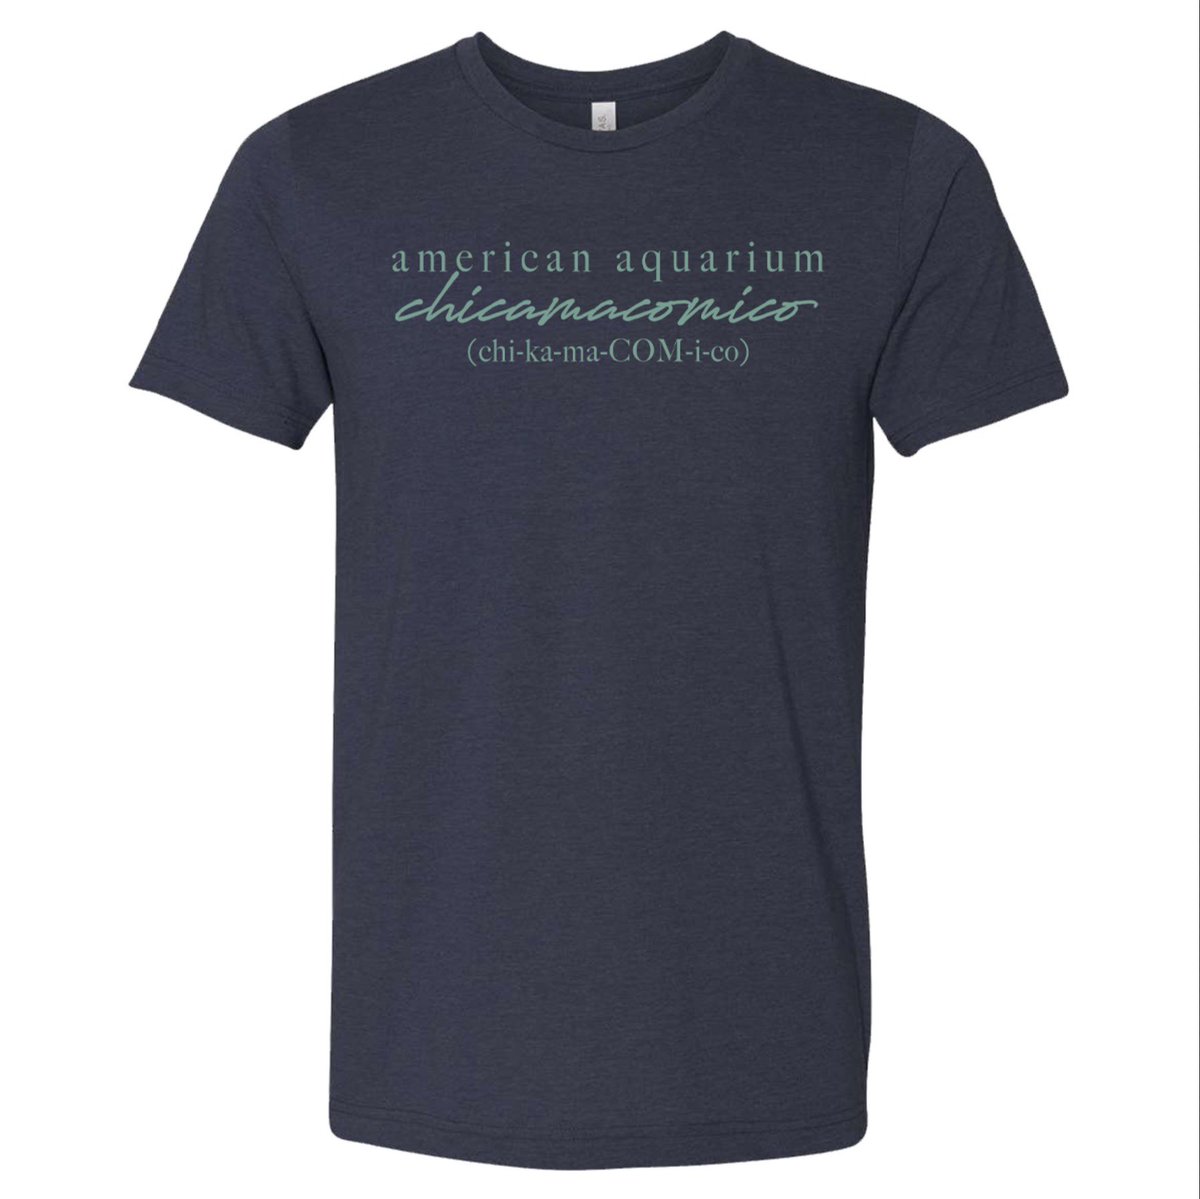 Had a few of these pronunciation tees left over from the preorder back in the spring. Two of each size. S-2XL. Get on if you want on. americanaquarium.com/store/3jk1864s…